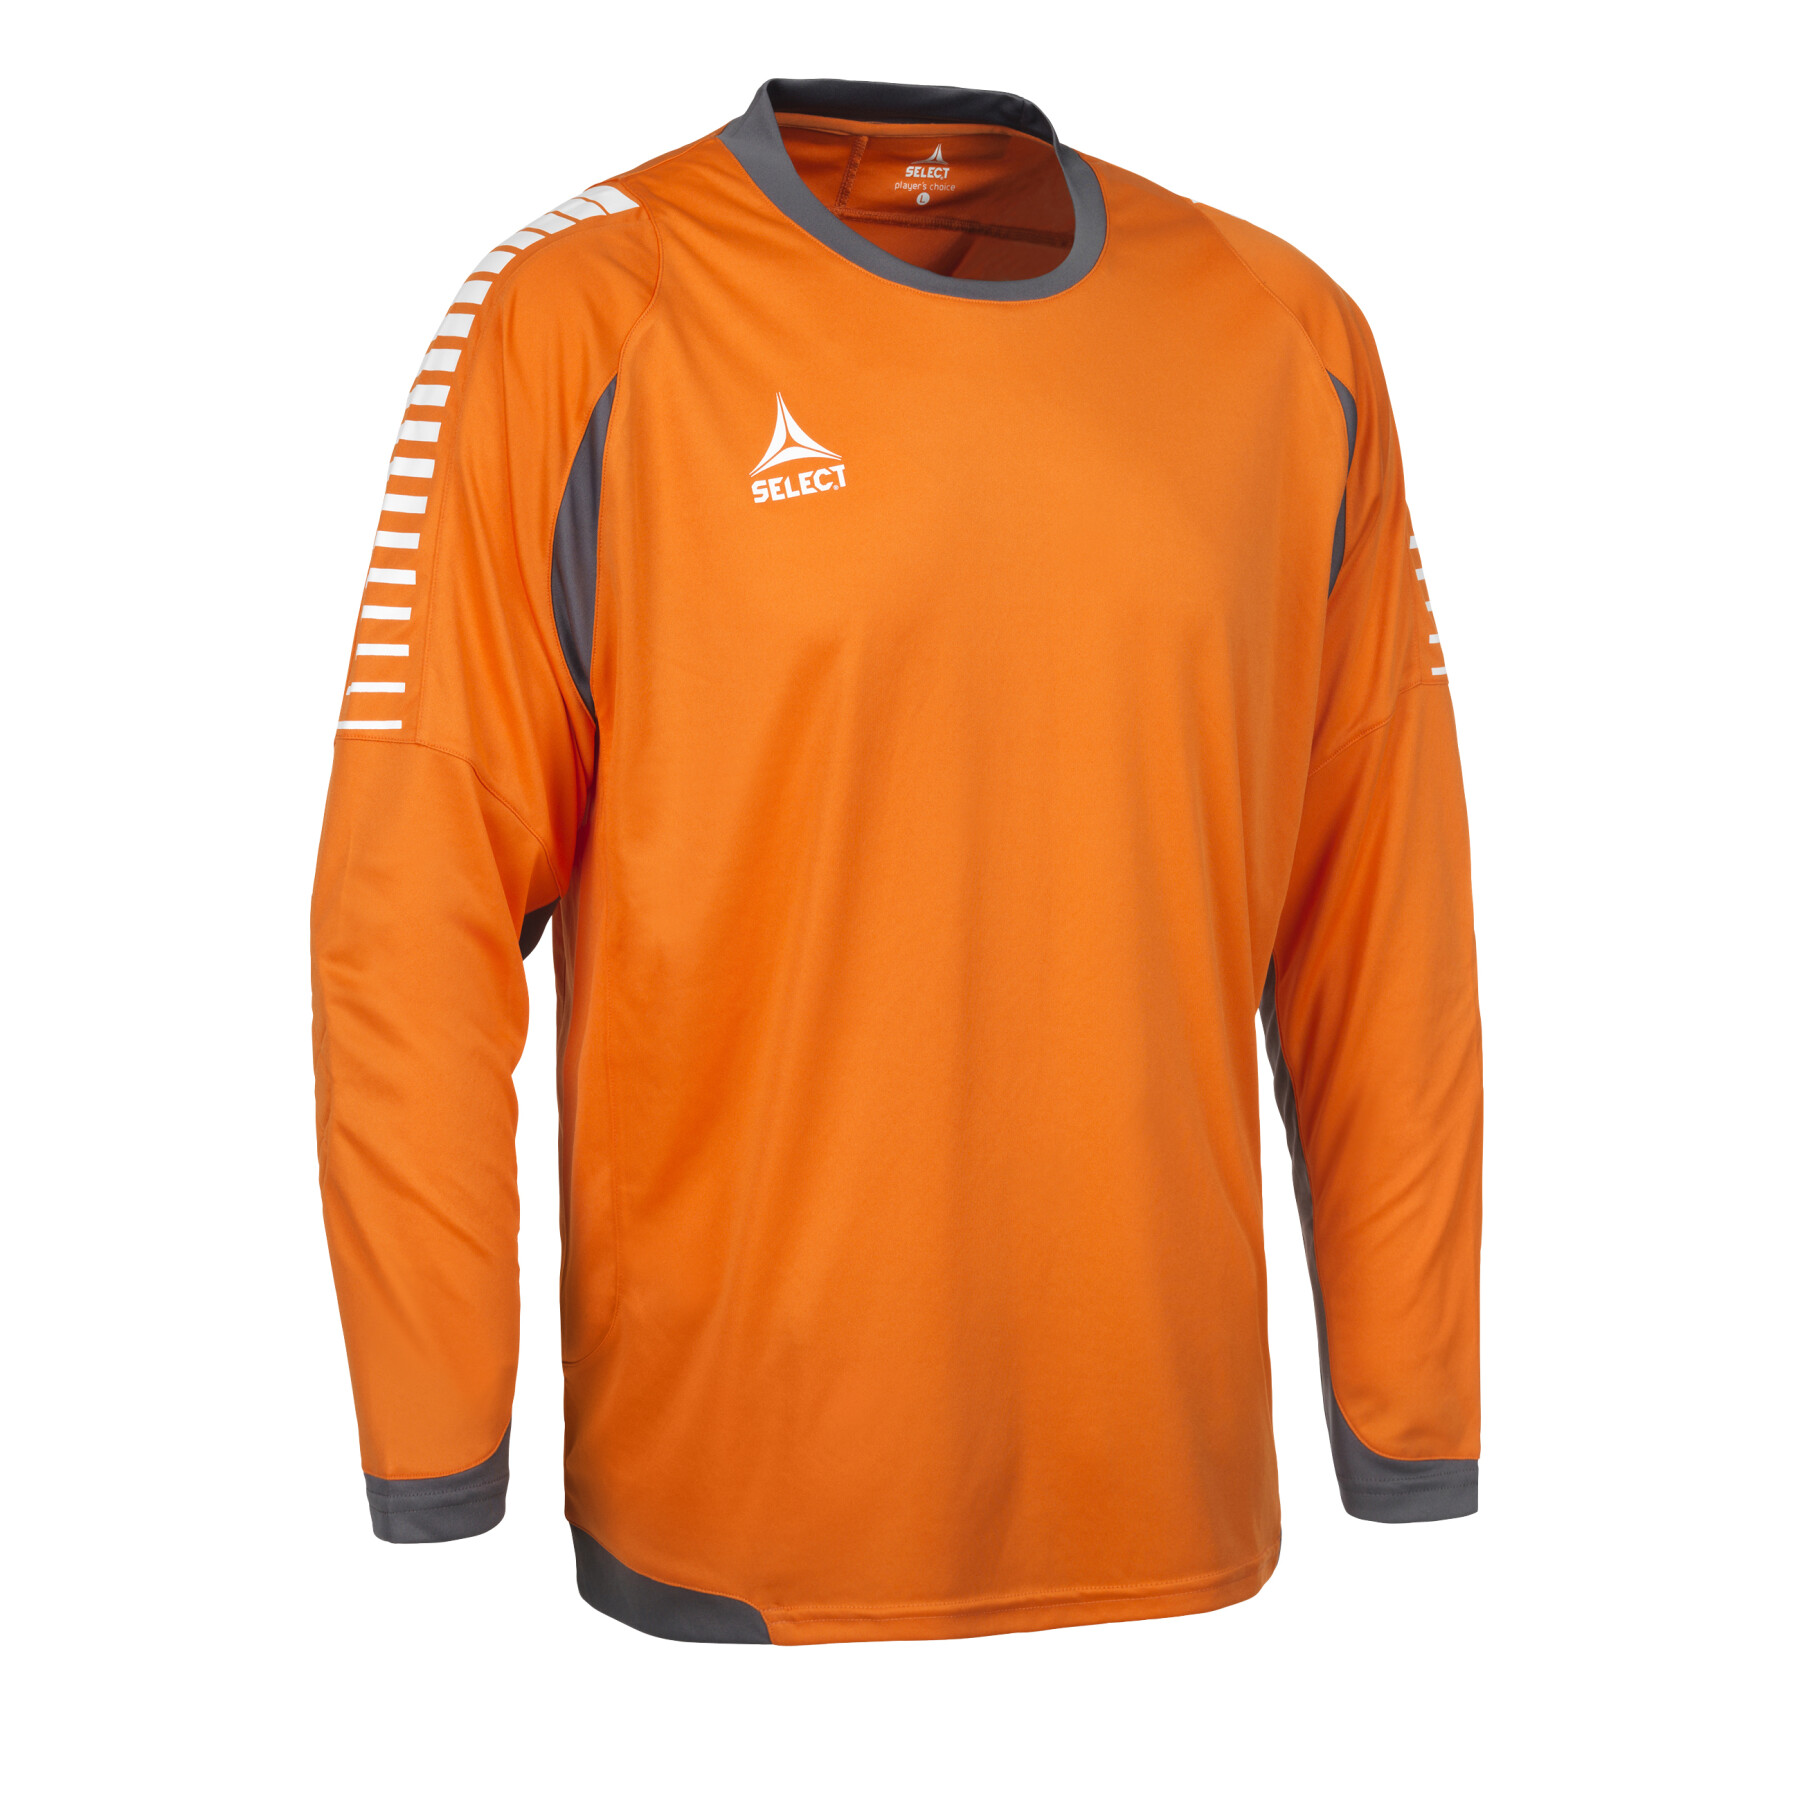 Goalkeeper jersey Select Chile